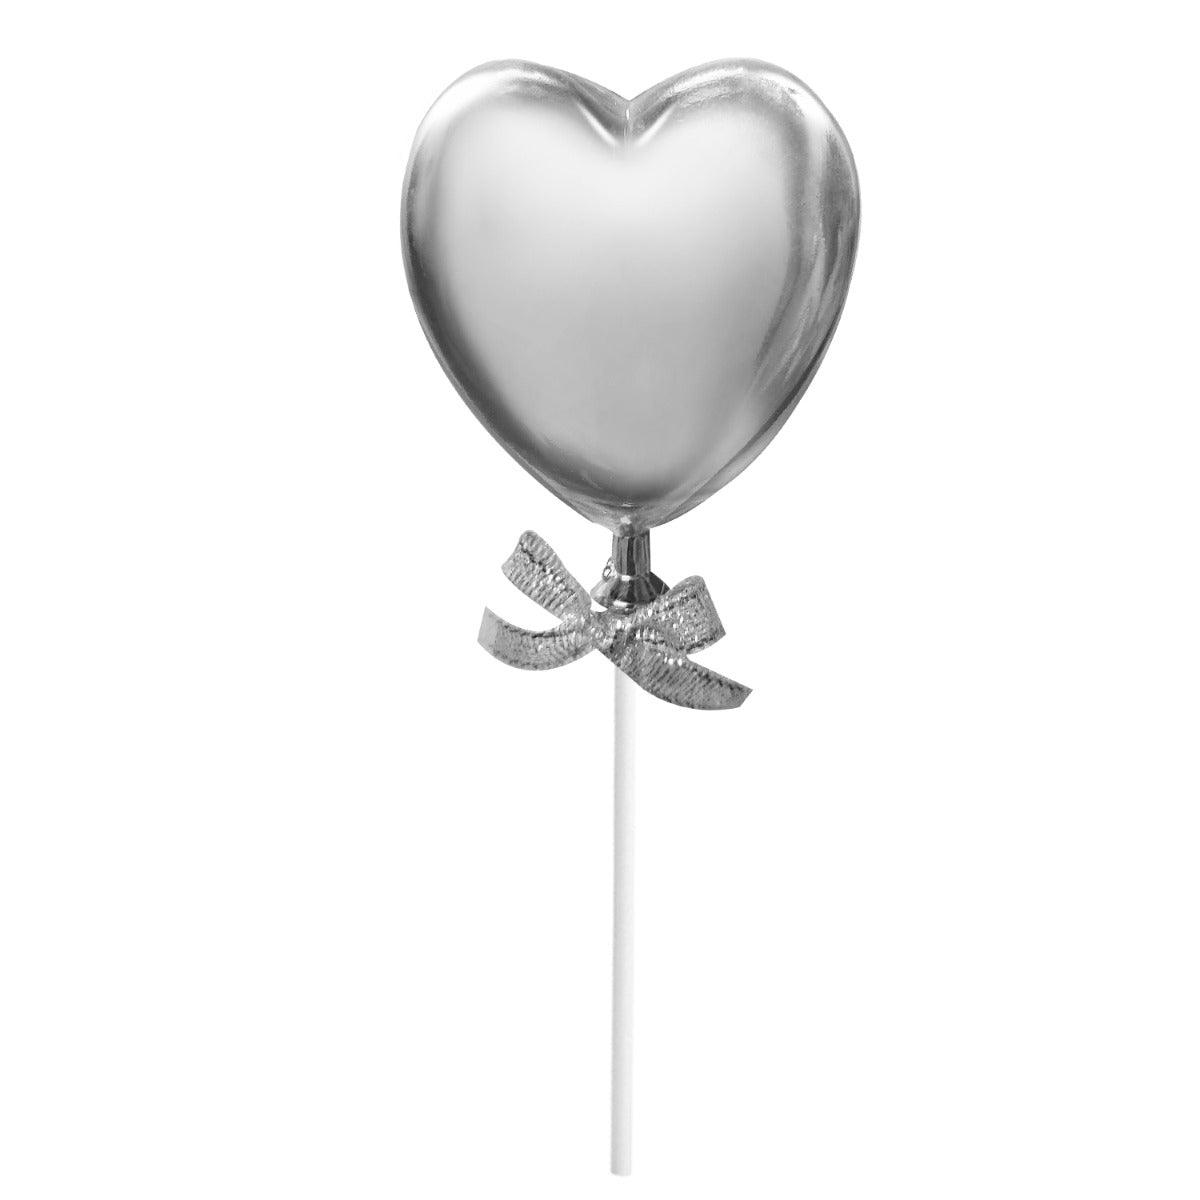 PartyCorp Silver Heart Shaped Cake Topper, 1 Pc